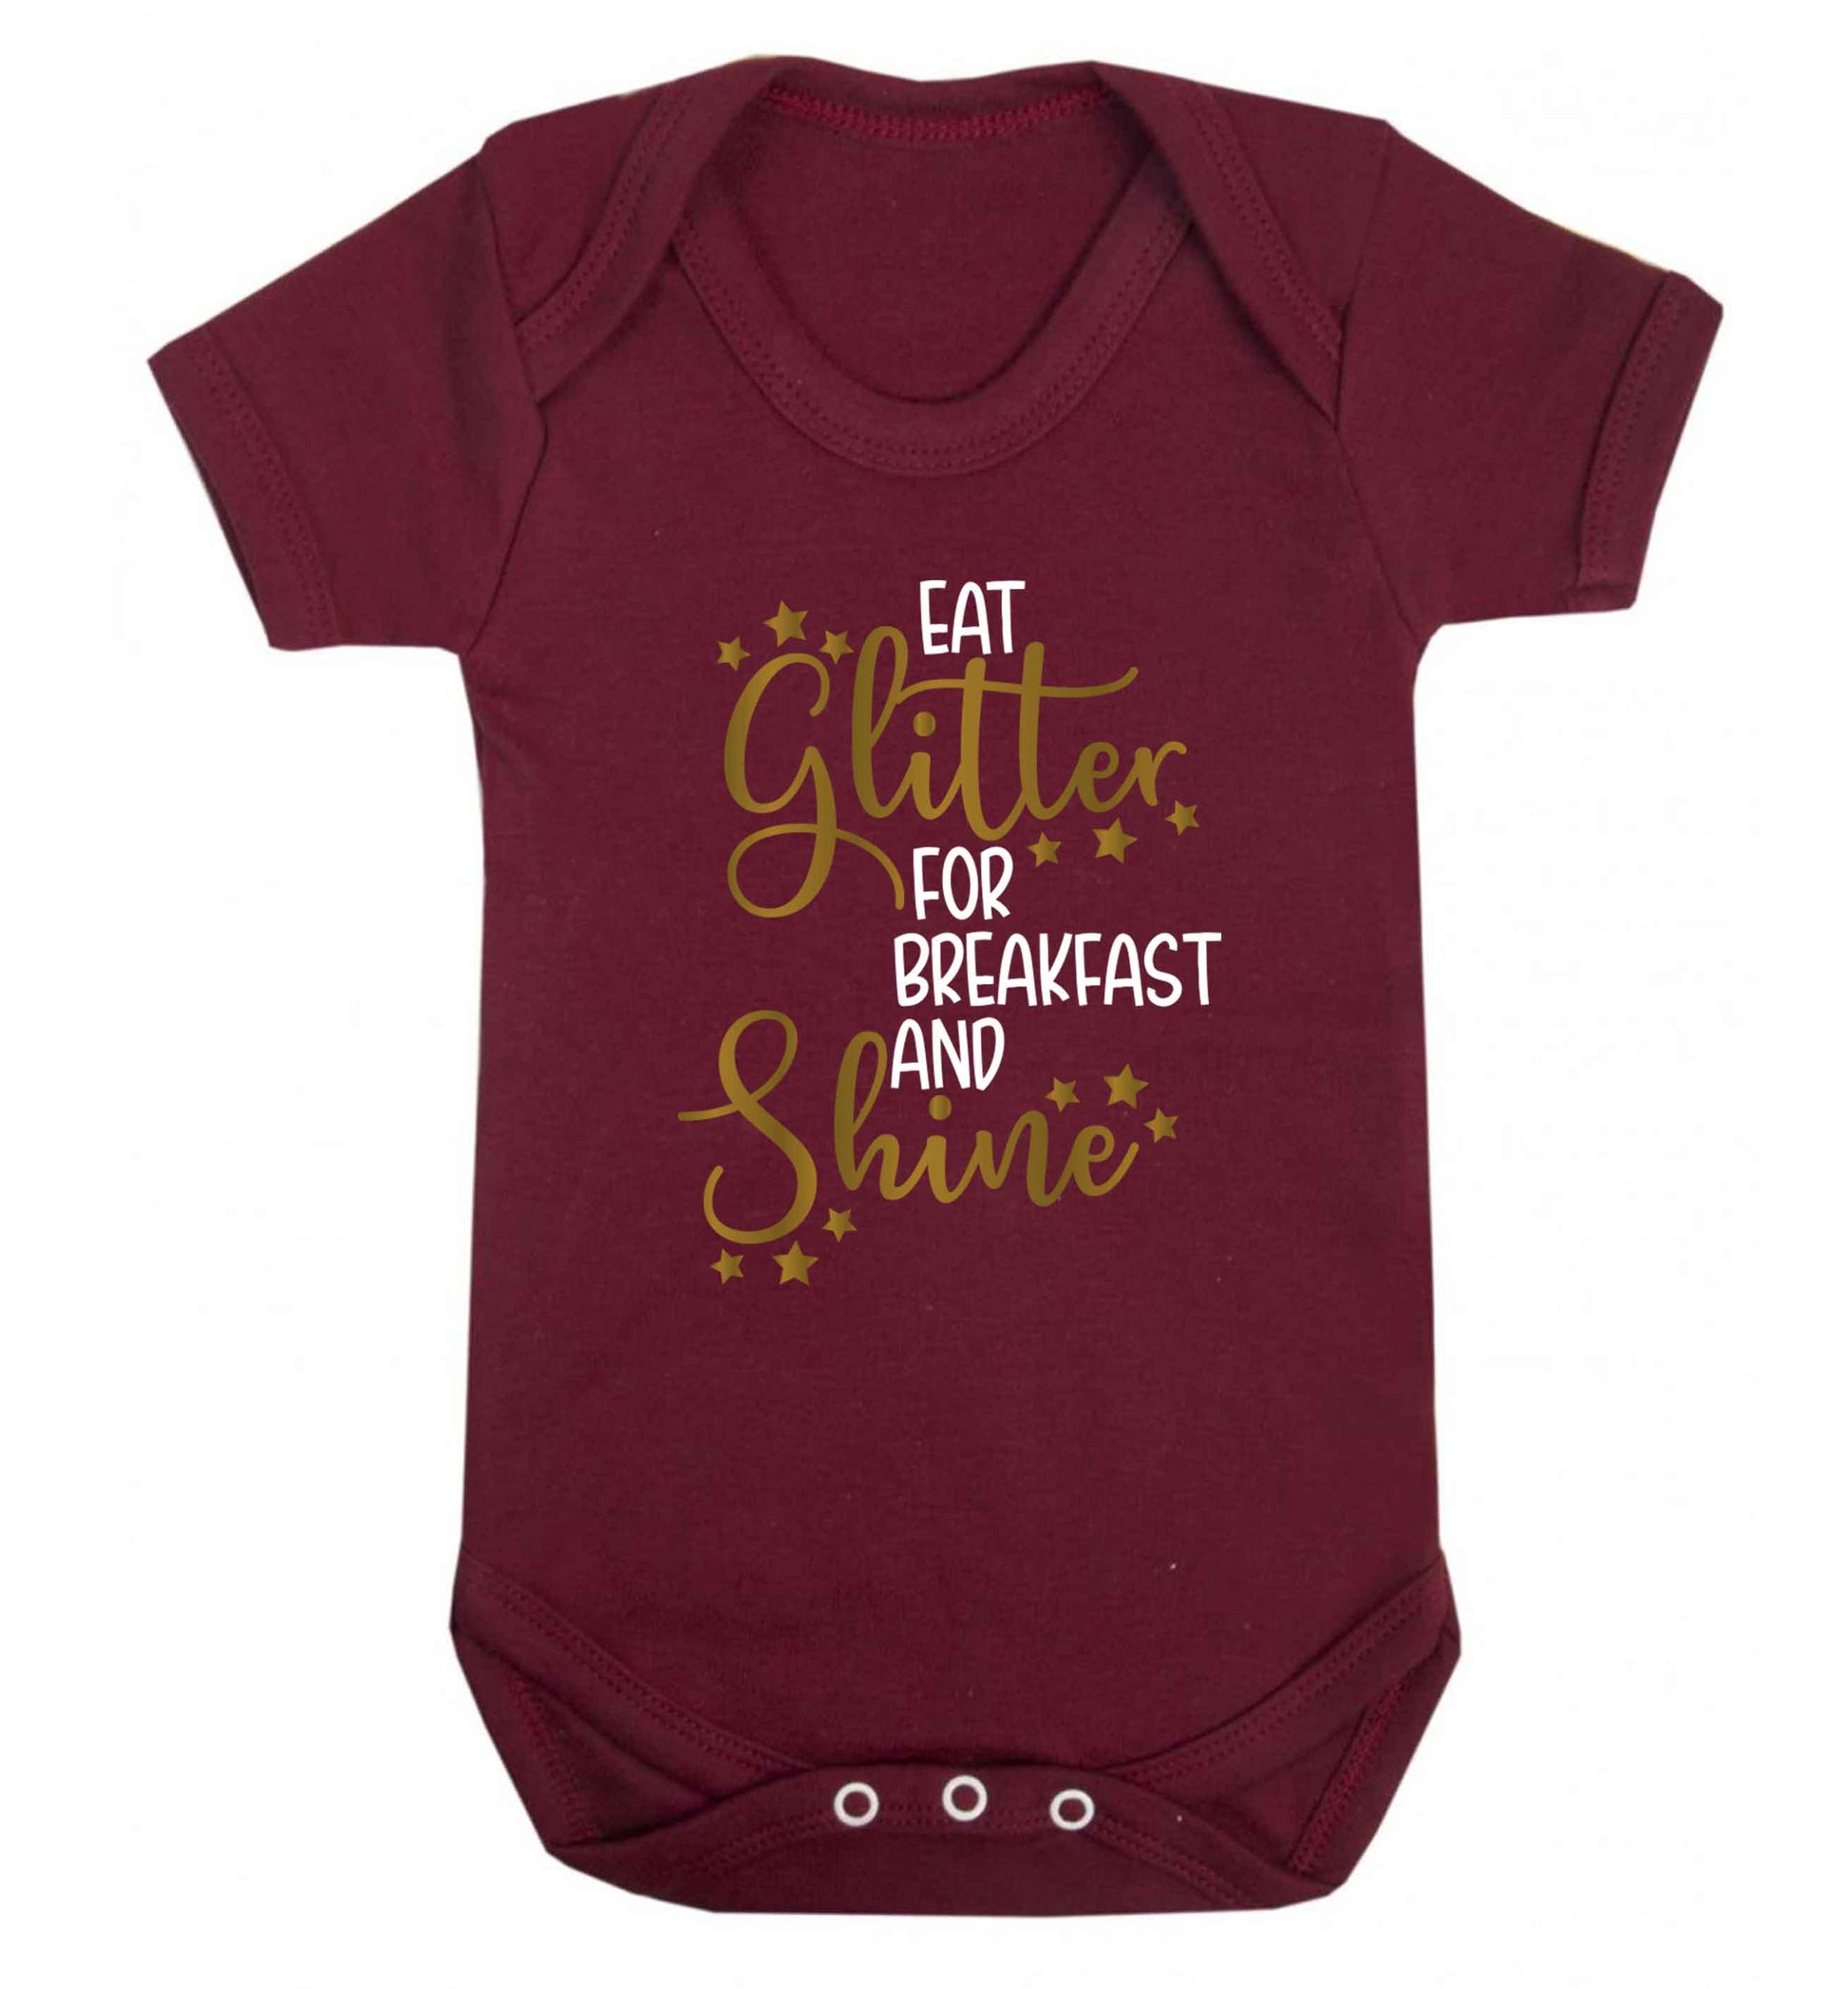 Eat glitter for breakfast and shine all day Baby Vest maroon 18-24 months